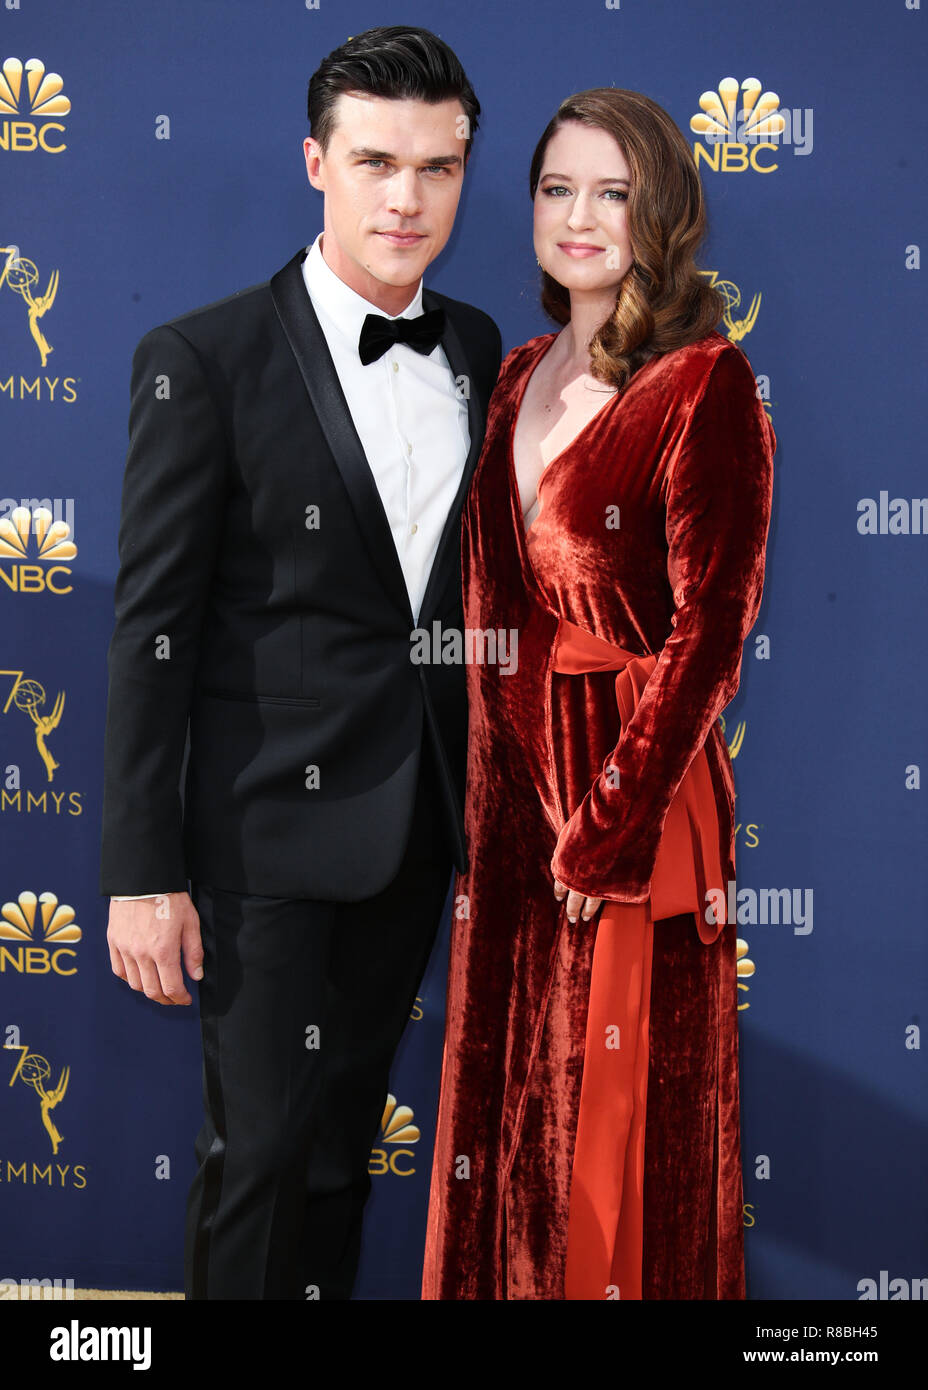 LOS ANGELES, CA, USA - SEPTEMBER 17: Finn Wittrock, Sarah Roberts at the 70th Annual Primetime Emmy Awards held at Microsoft Theater at L.A. Live on September 17, 2018 in Los Angeles, California, United States. (Photo by Xavier Collin/Image Press Agency) Stock Photo